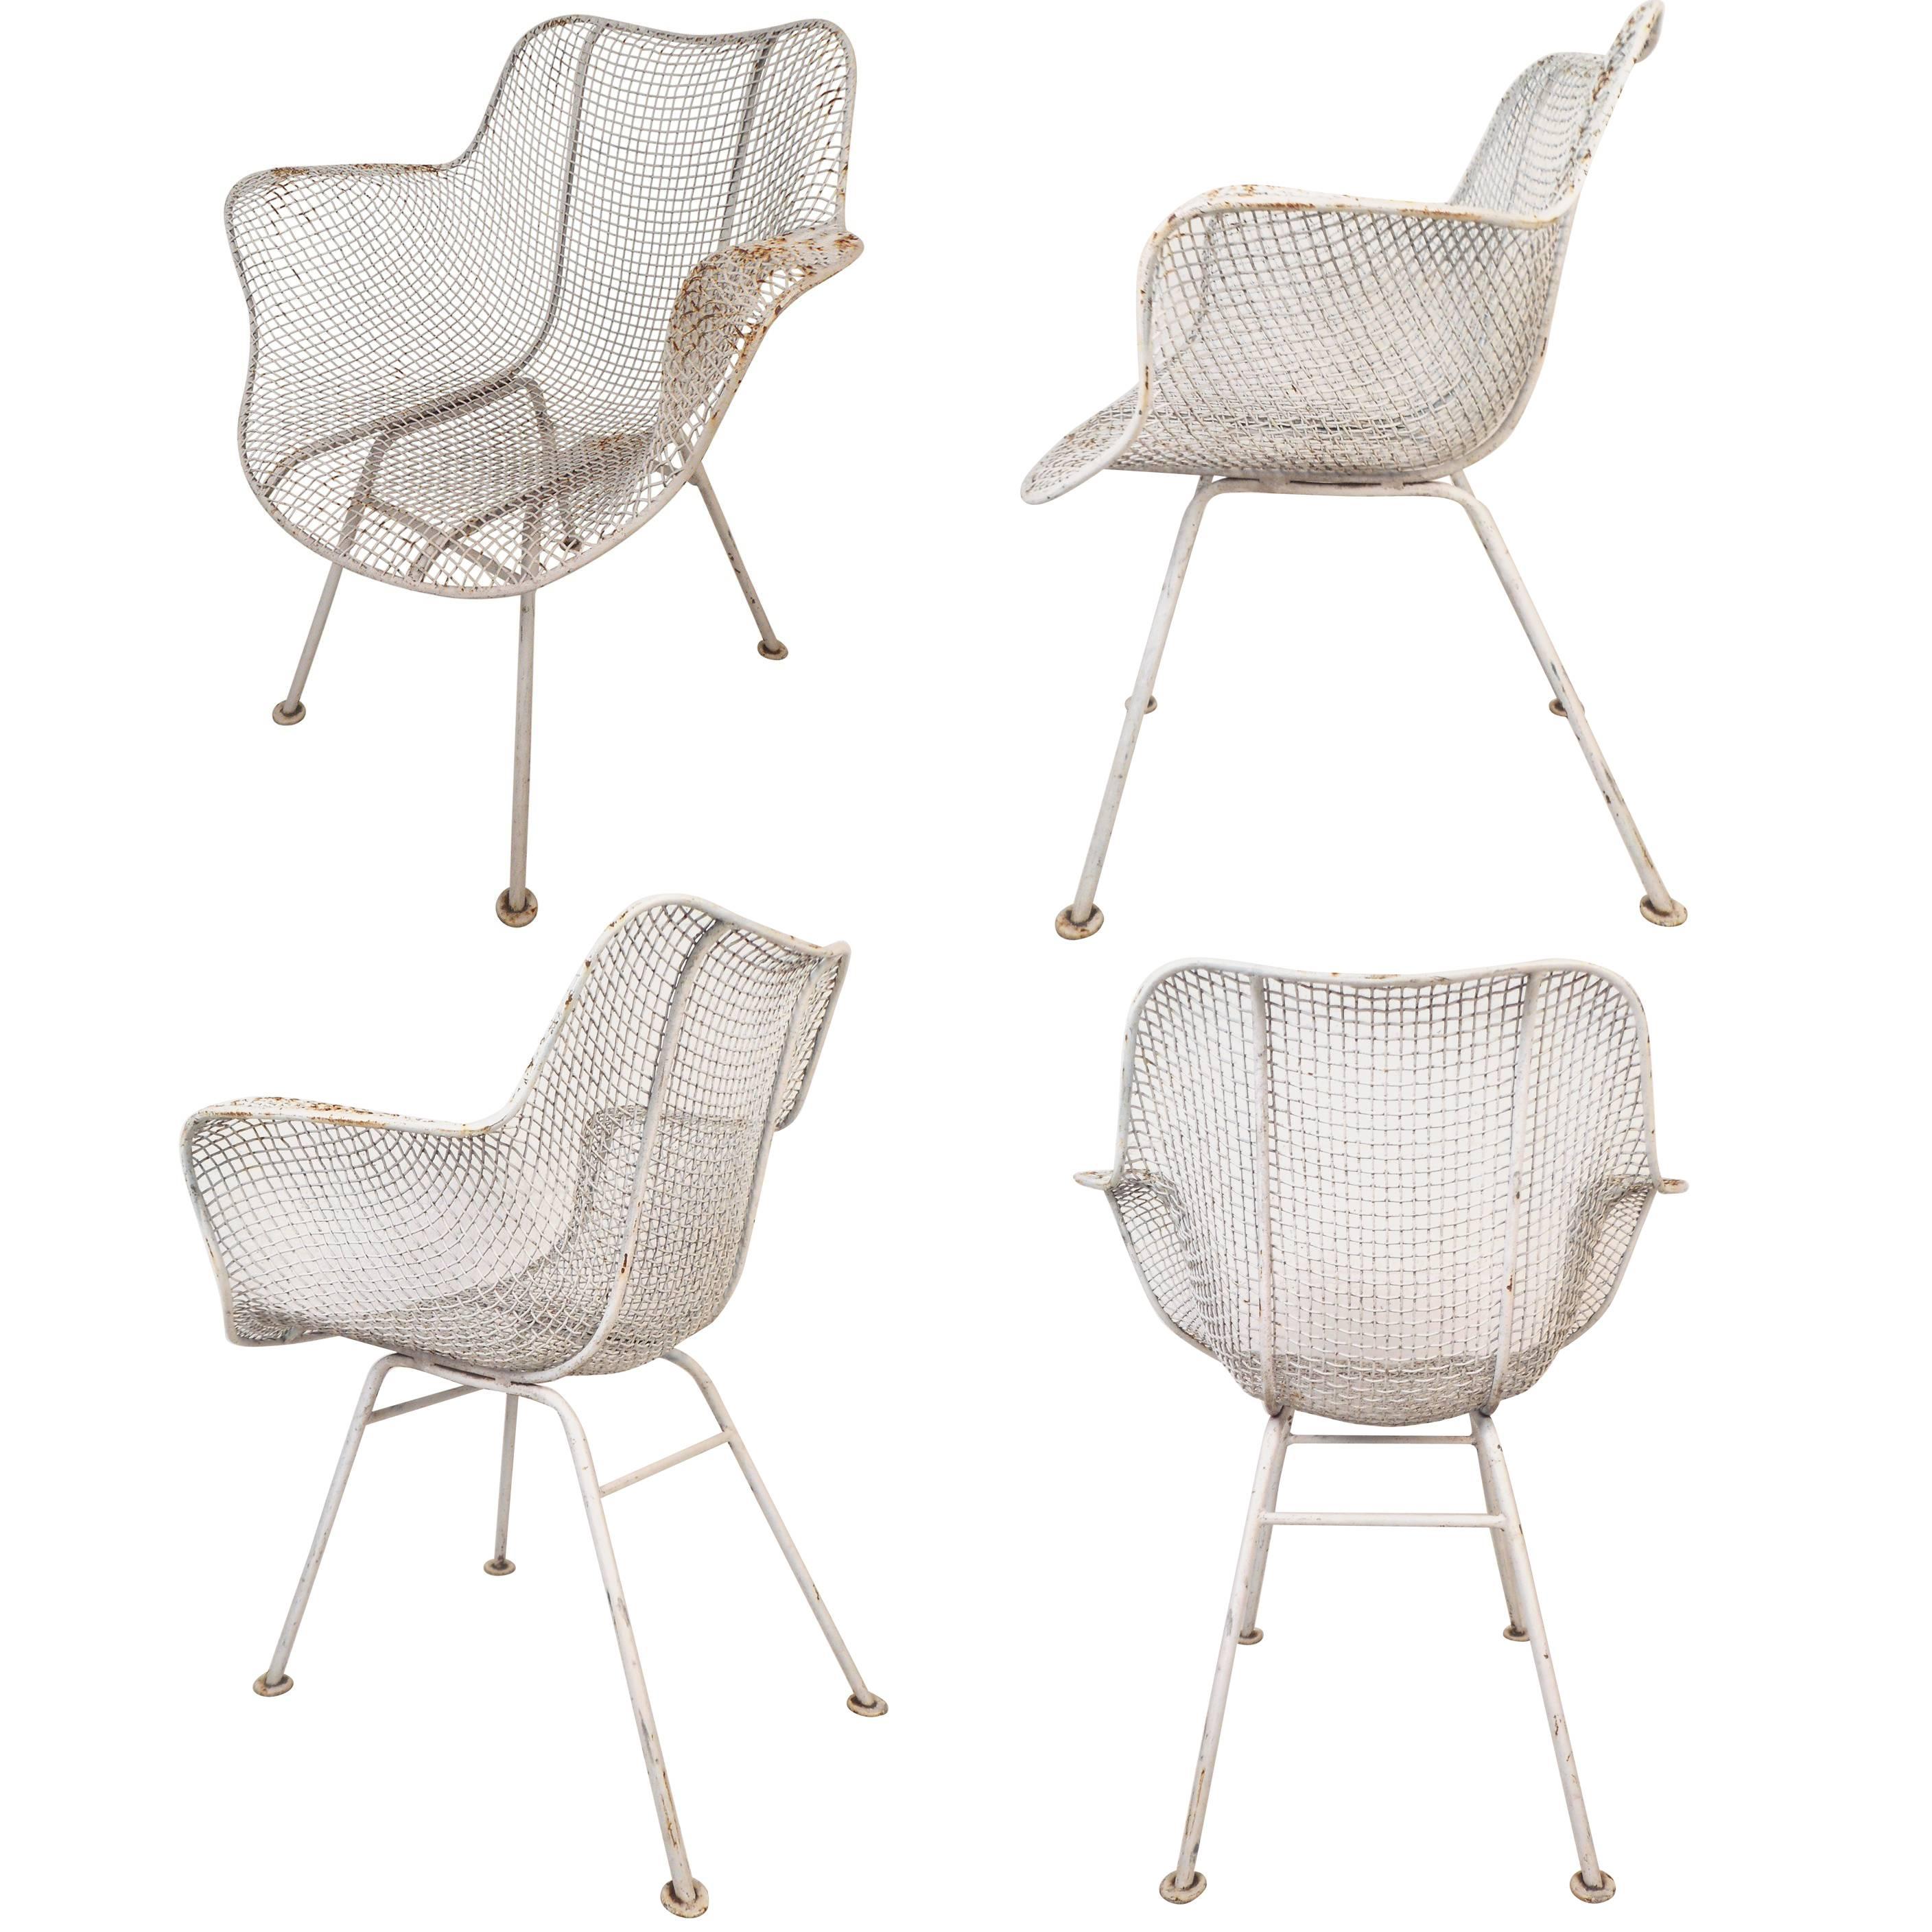 Set of Four Mid-Century Modern Sculptura Patio Chairs by Russell Woodard